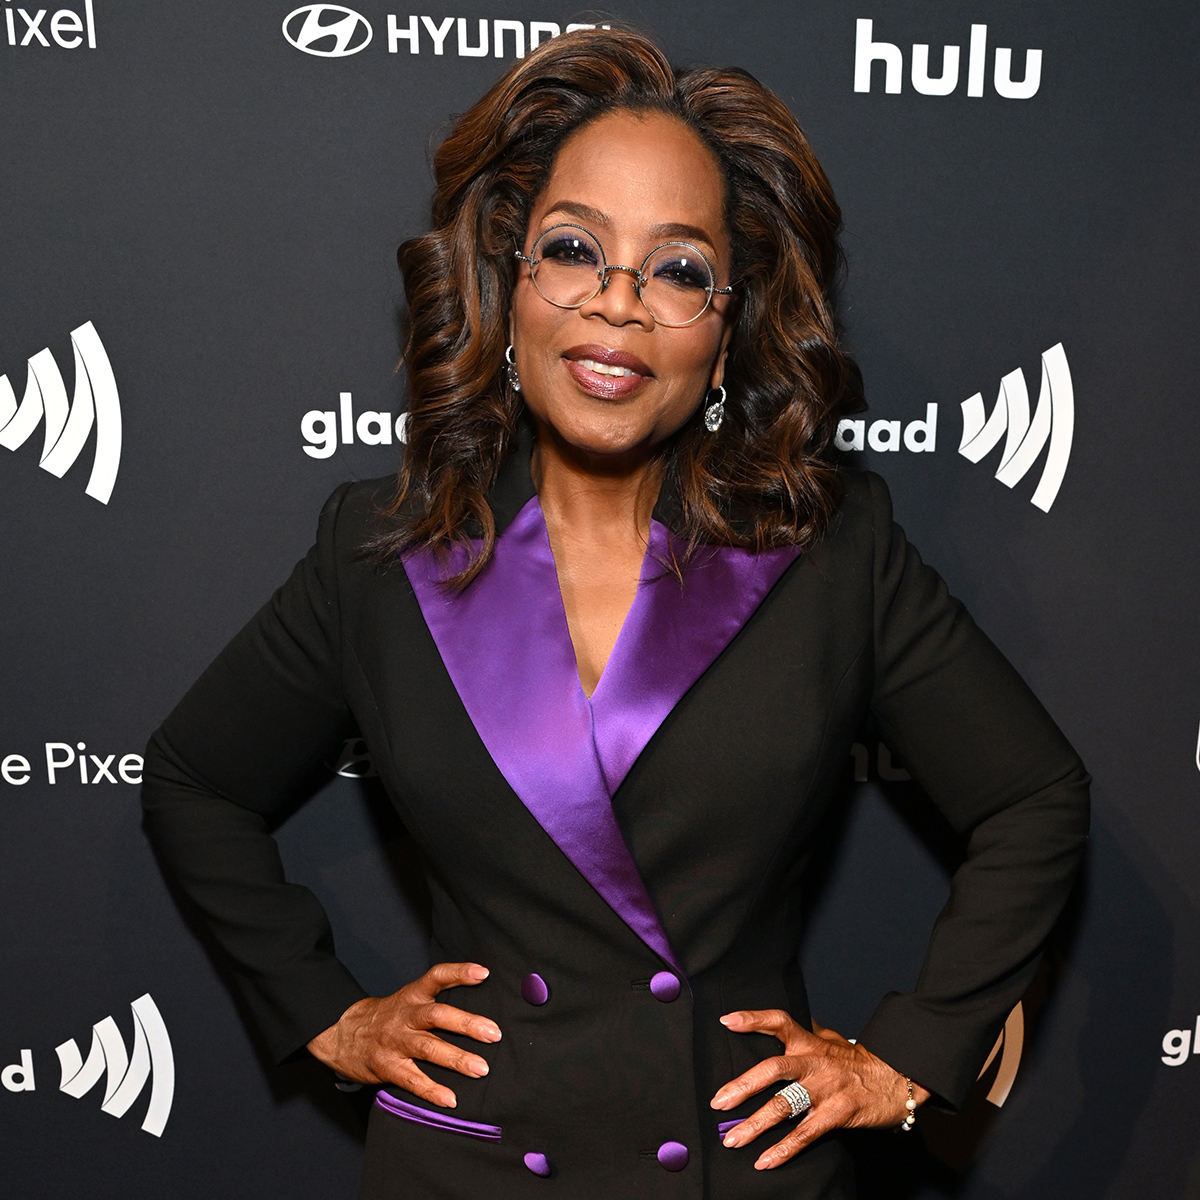 Oprah Winfrey Addresses Weight Loss, Shame, and Body Image Criticism in TV Special